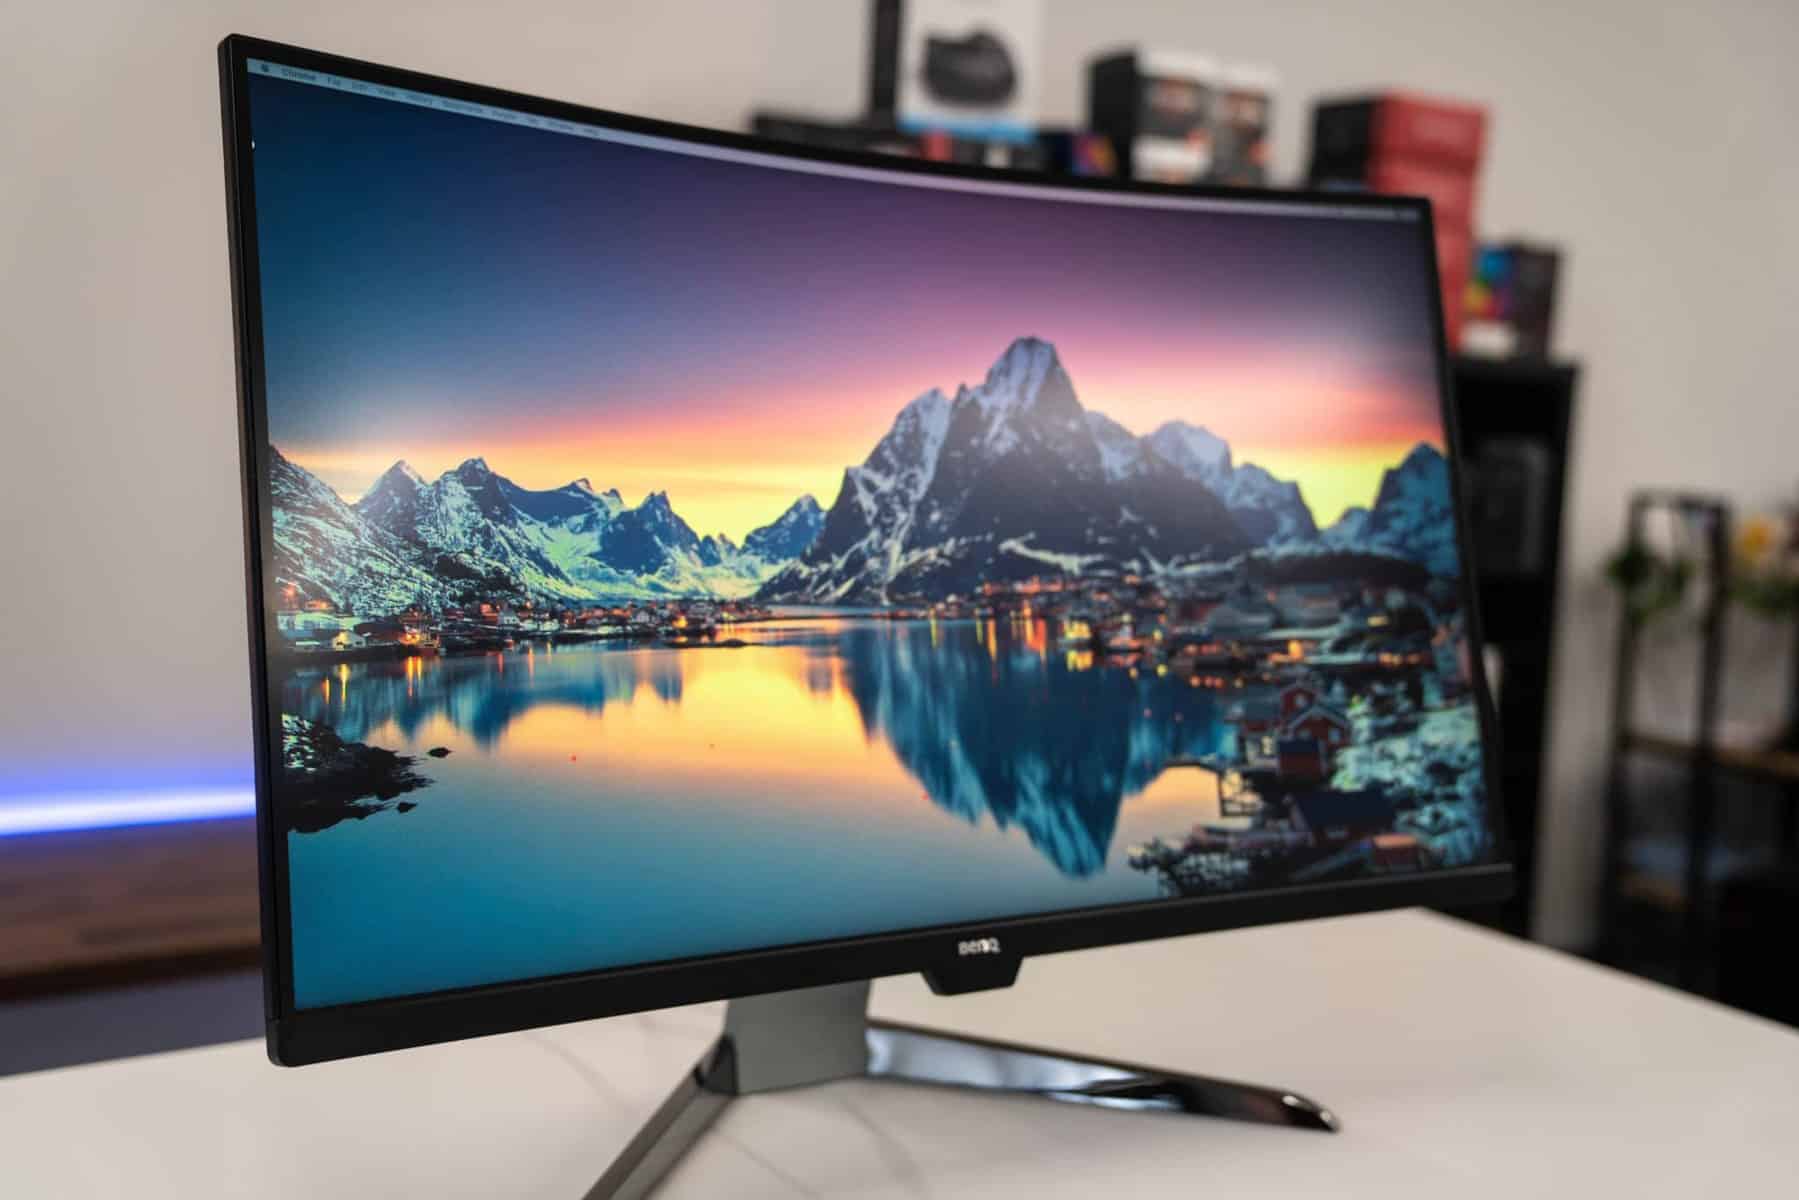 Best Monitor Size For Gaming